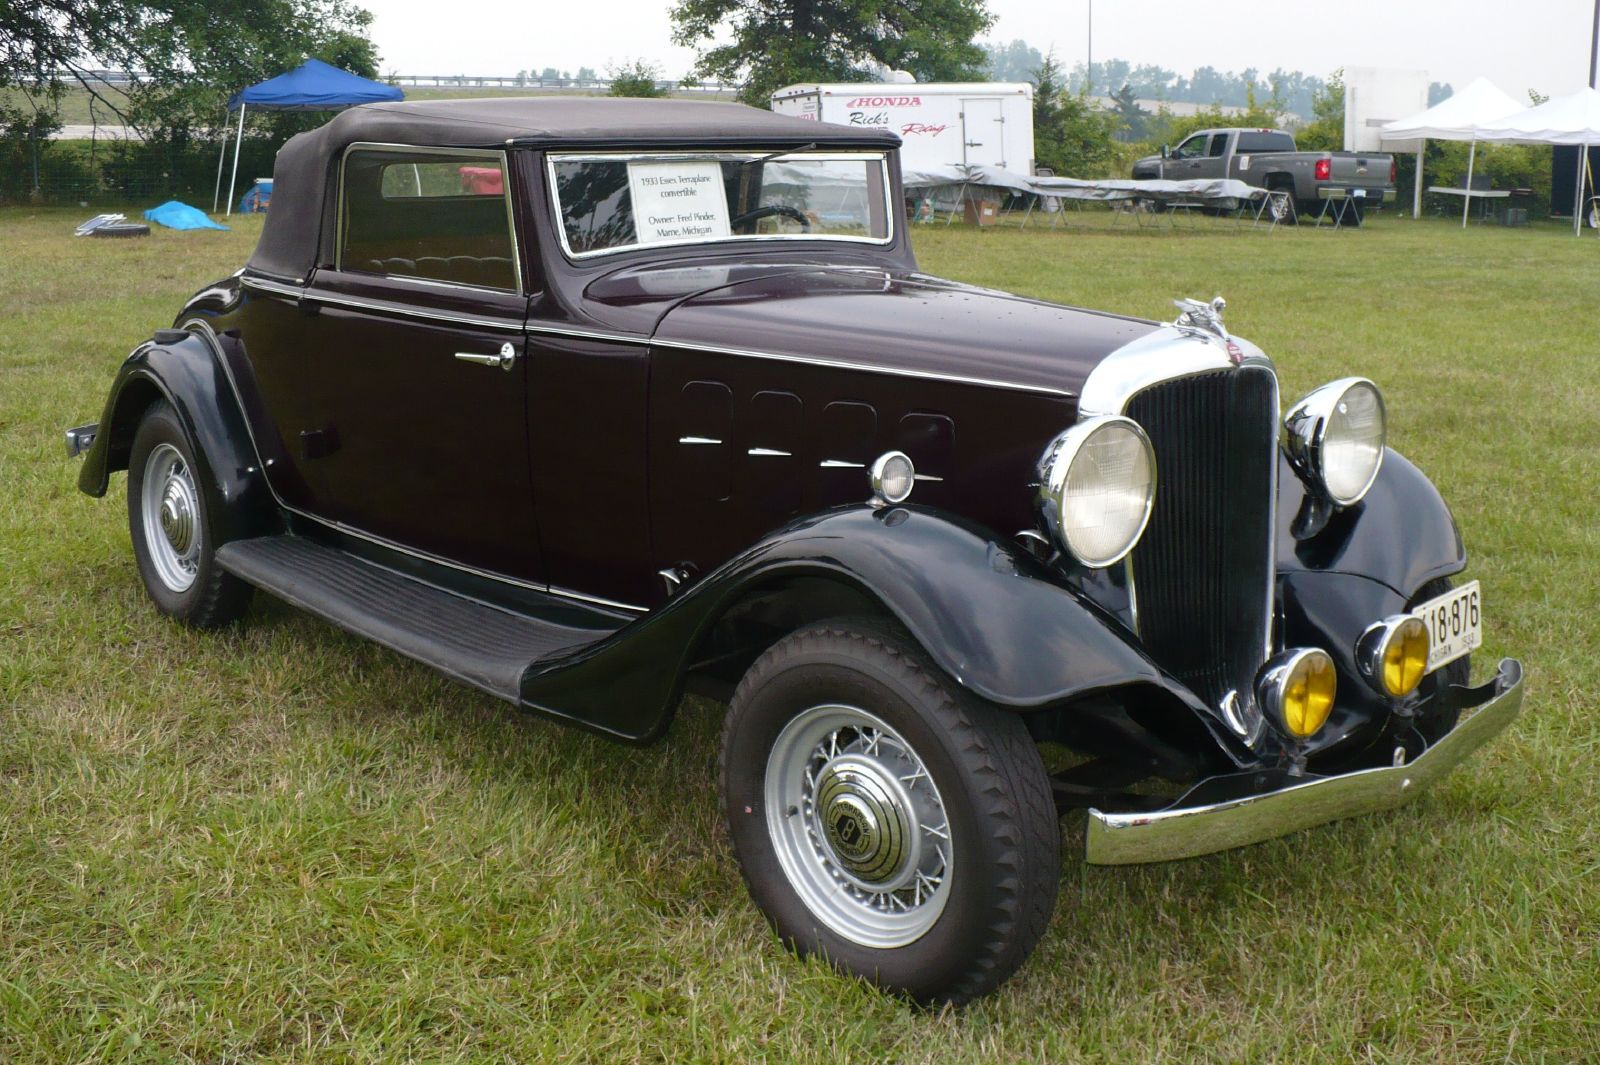 a classic style car is displayed at the show